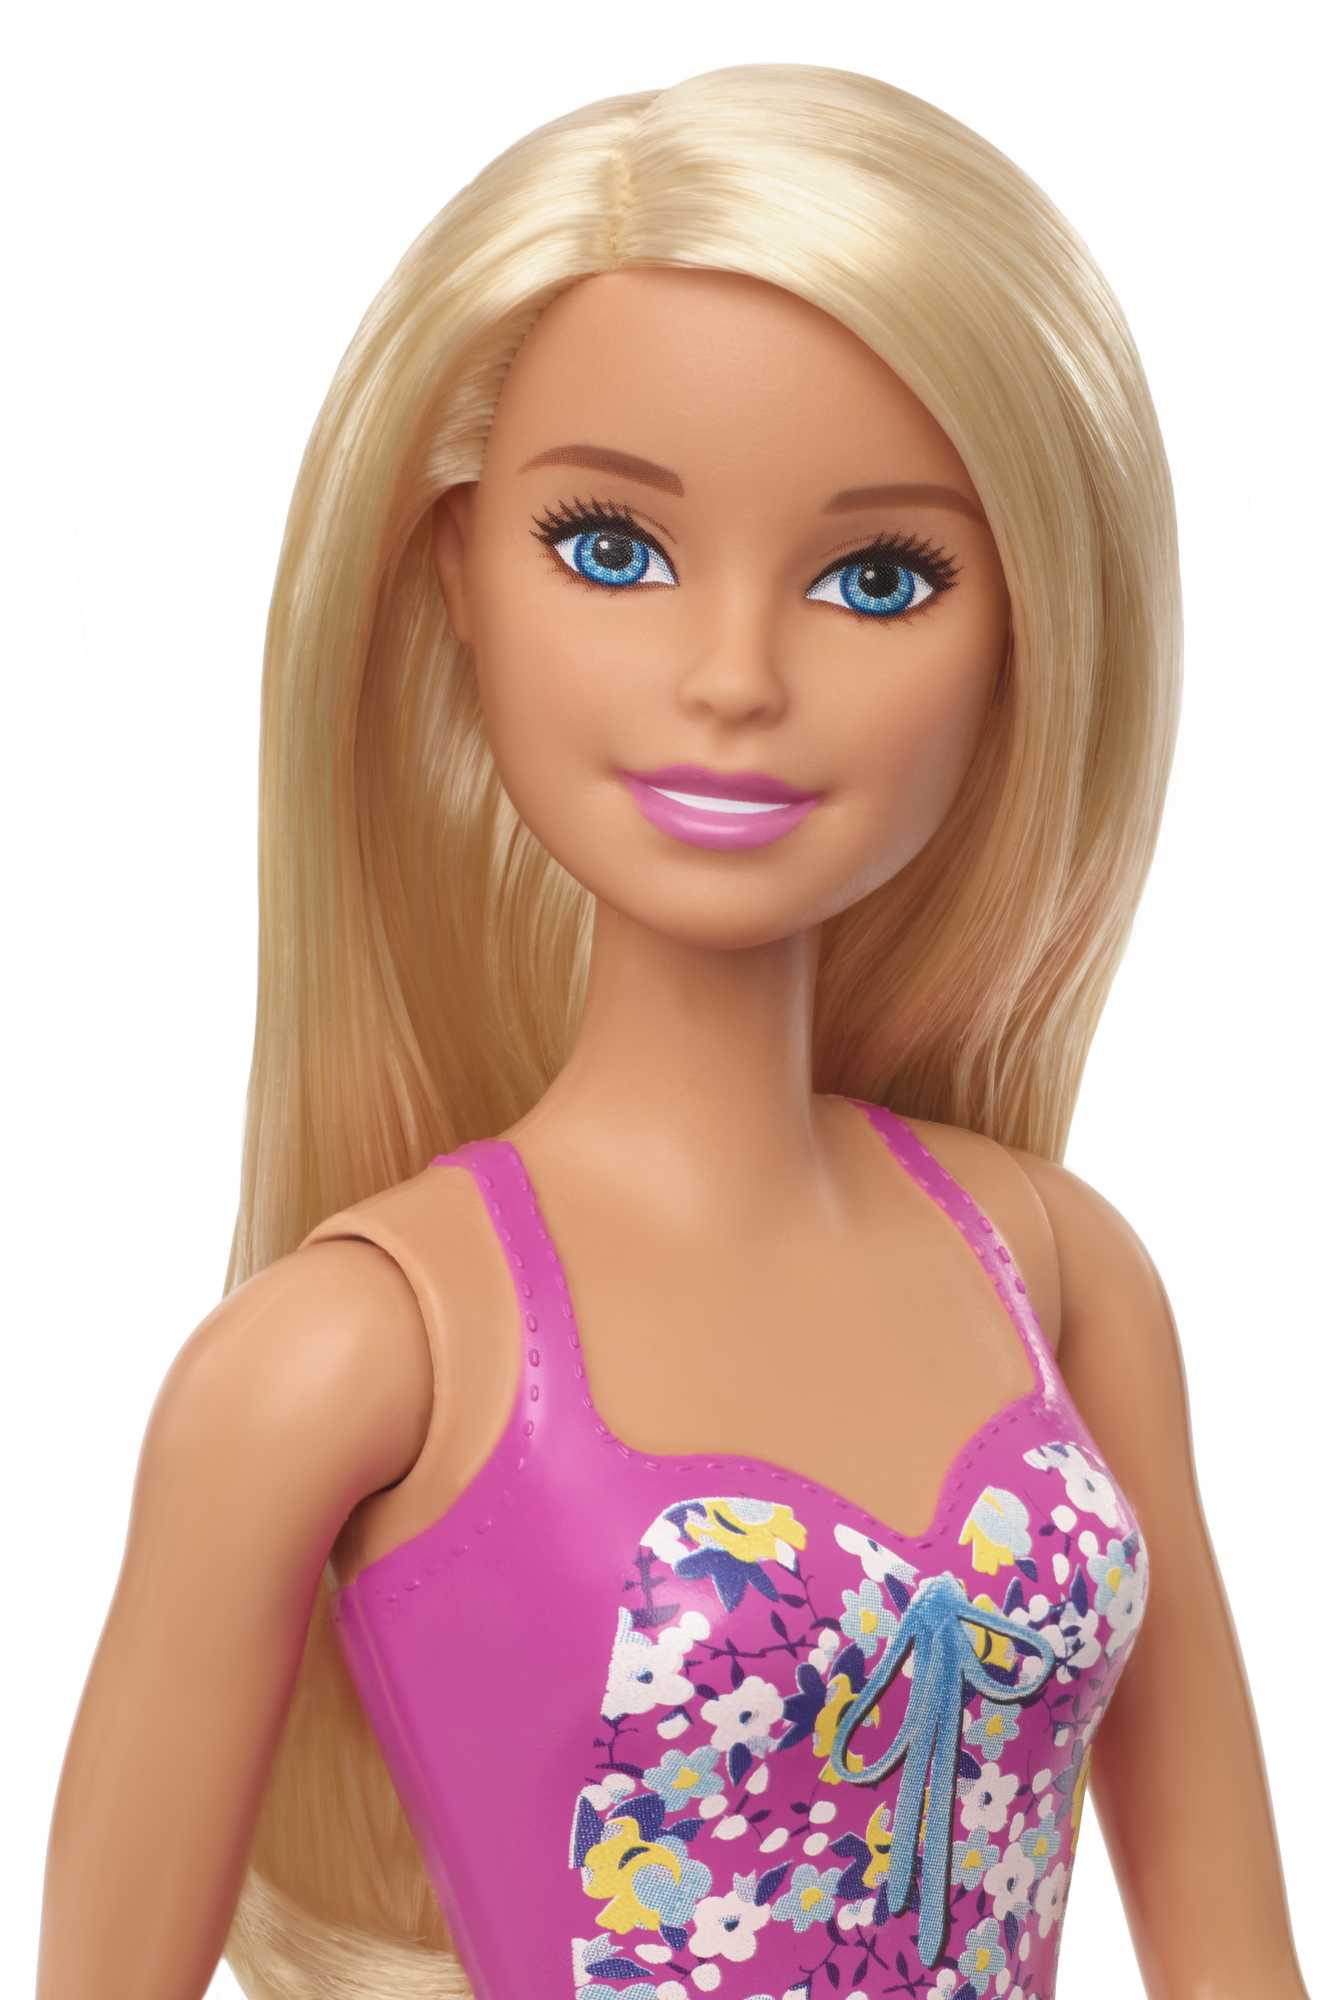 Barbie Swimsuit Beach Doll with Blonde Hair & Pink Floral Print Suit - image 2 of 6